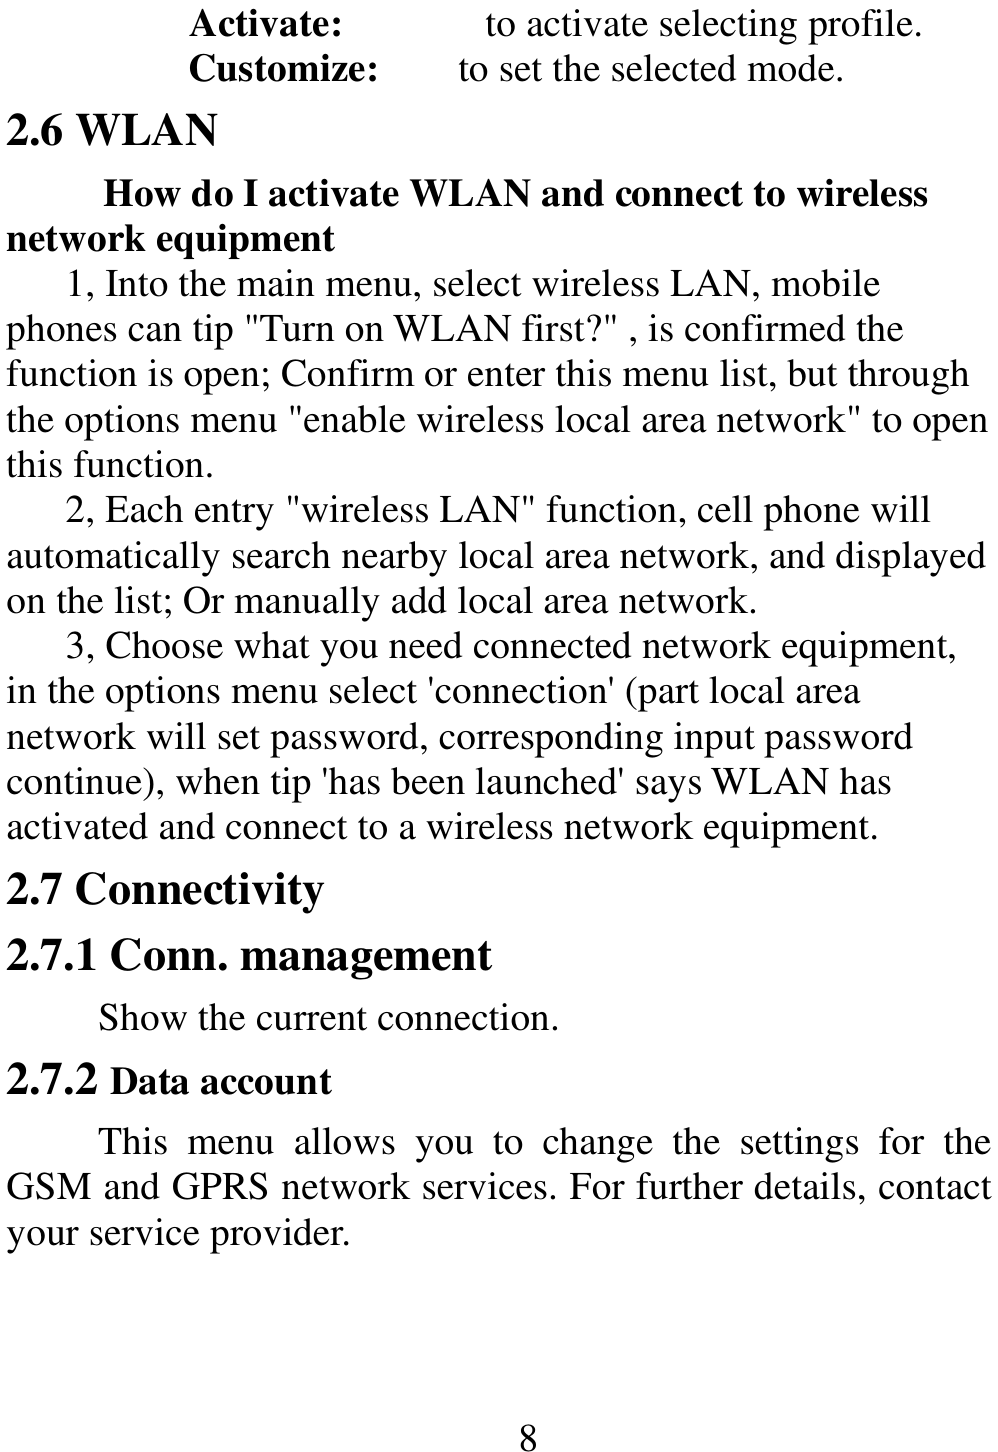                                                      8Activate:      to activate selecting profile. Customize:        to set the selected mode. 2.6 WLAN How do I activate WLAN and connect to wireless network equipment 1, Into the main menu, select wireless LAN, mobile phones can tip &quot;Turn on WLAN first?&quot; , is confirmed the function is open; Confirm or enter this menu list, but through the options menu &quot;enable wireless local area network&quot; to open this function. 2, Each entry &quot;wireless LAN&quot; function, cell phone will automatically search nearby local area network, and displayed on the list; Or manually add local area network. 3, Choose what you need connected network equipment, in the options menu select &apos;connection&apos; (part local area network will set password, corresponding input password continue), when tip &apos;has been launched&apos; says WLAN has activated and connect to a wireless network equipment. 2.7 Connectivity 2.7.1 Conn. management Show the current connection.   2.7.2 Data account This  menu  allows  you  to  change  the  settings  for  the GSM and GPRS network services. For further details, contact your service provider. 